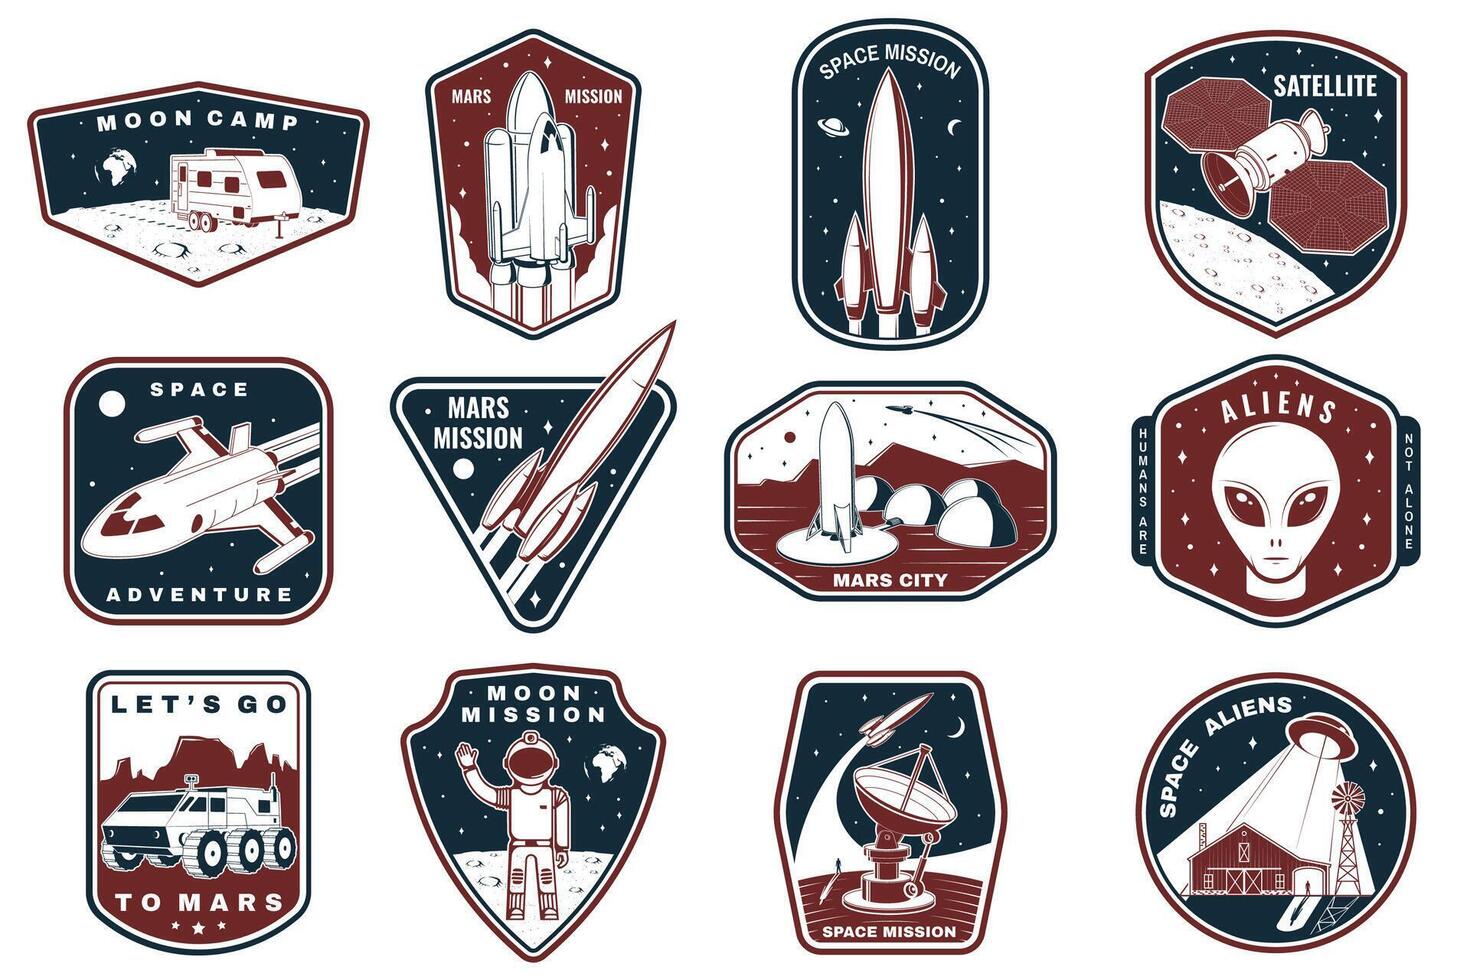 Set of space mission logo, badge, patch. Vector. Concept for shirt, print, stamp. Vintage typography design with space rocket, alien, mars city, camper van on the moon and earth silhouette vector